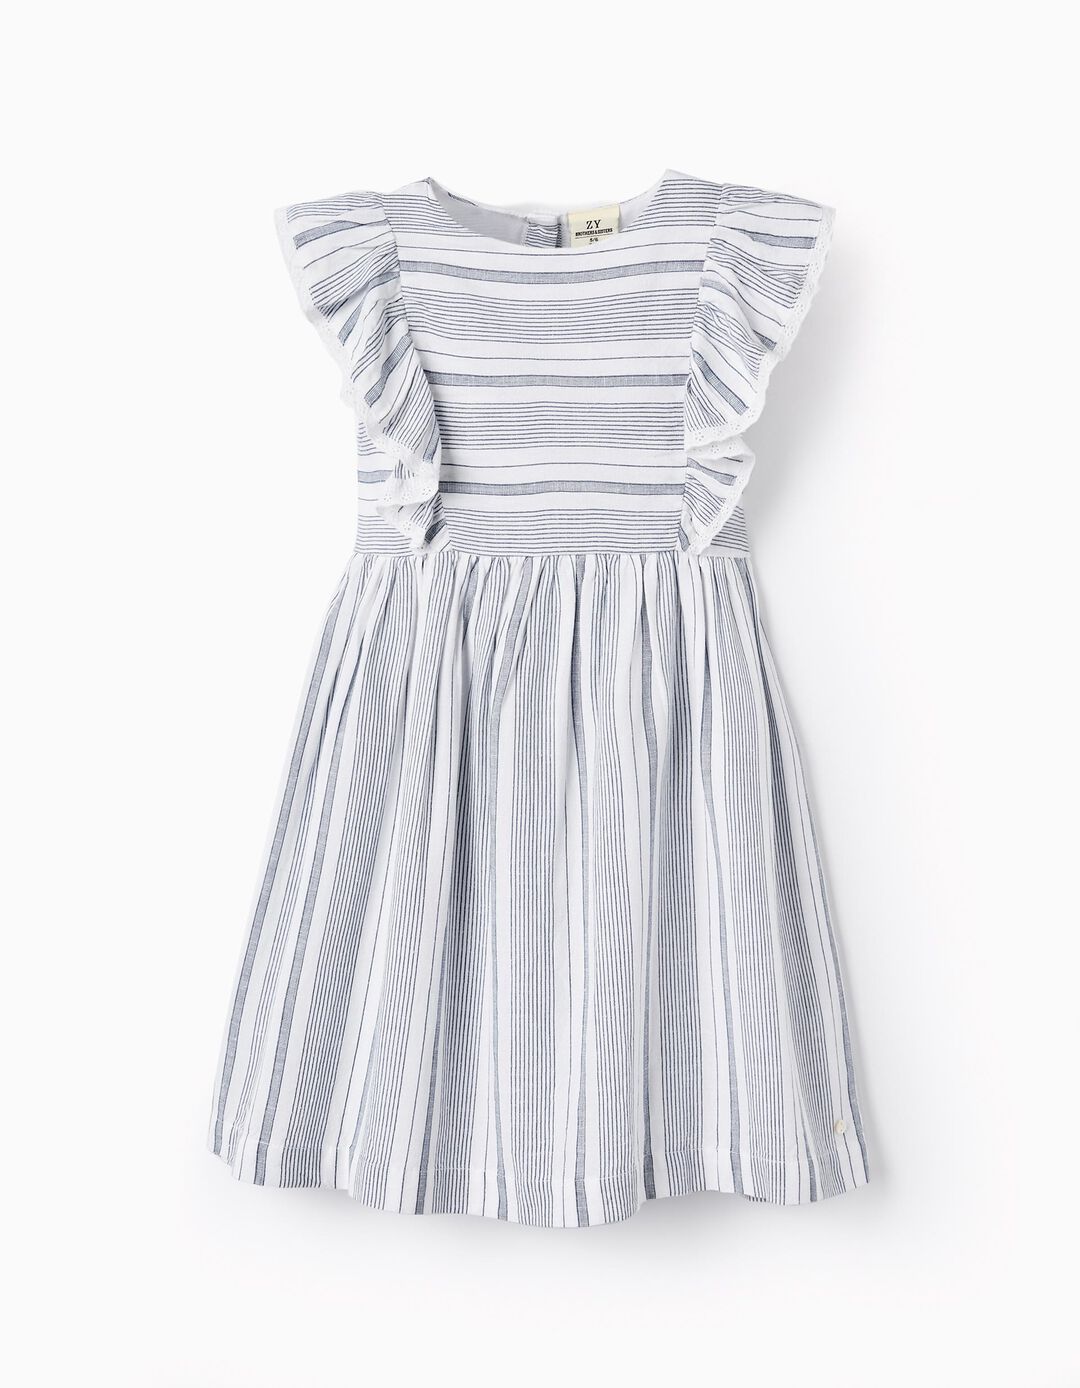 Striped Dress with English Embroidery for Girls 'B&S', White/Dark Blue